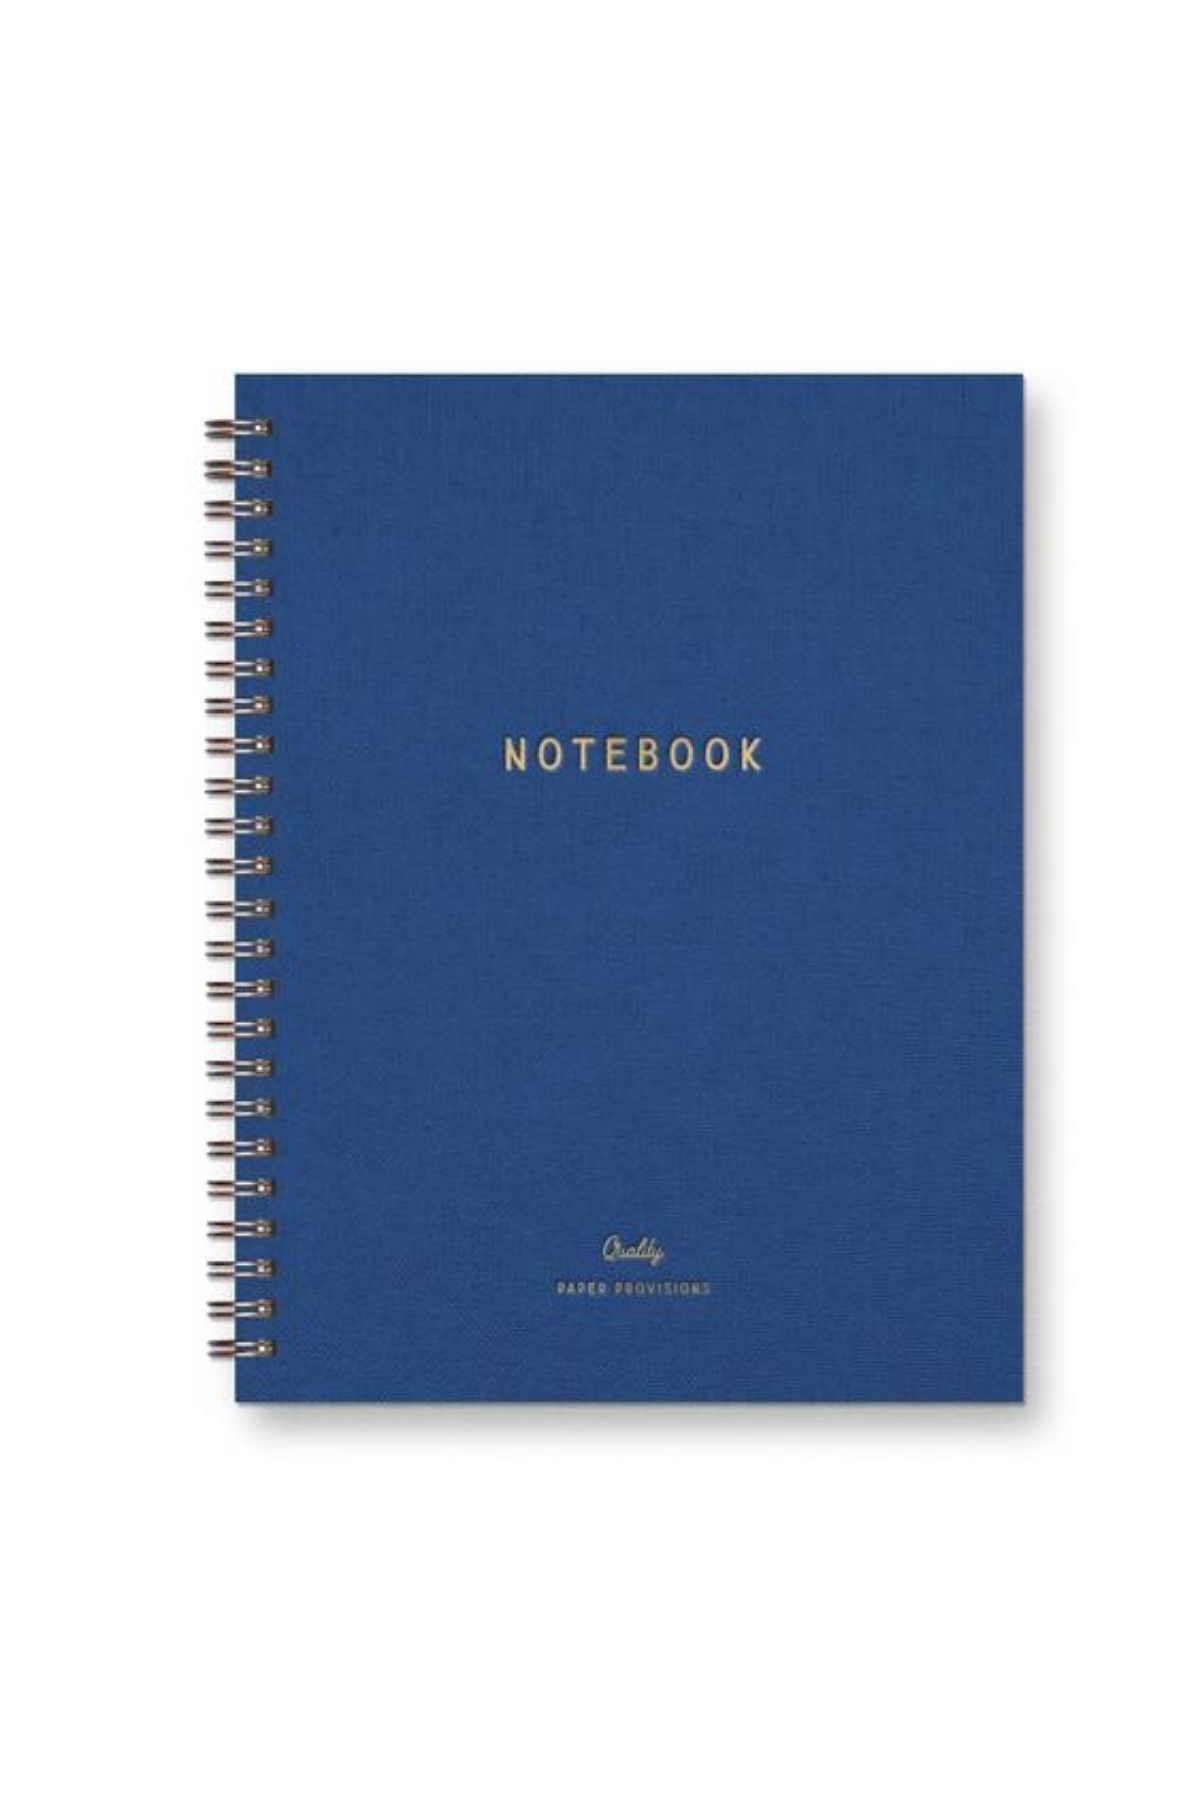 Signature Journal: Lined Notebook